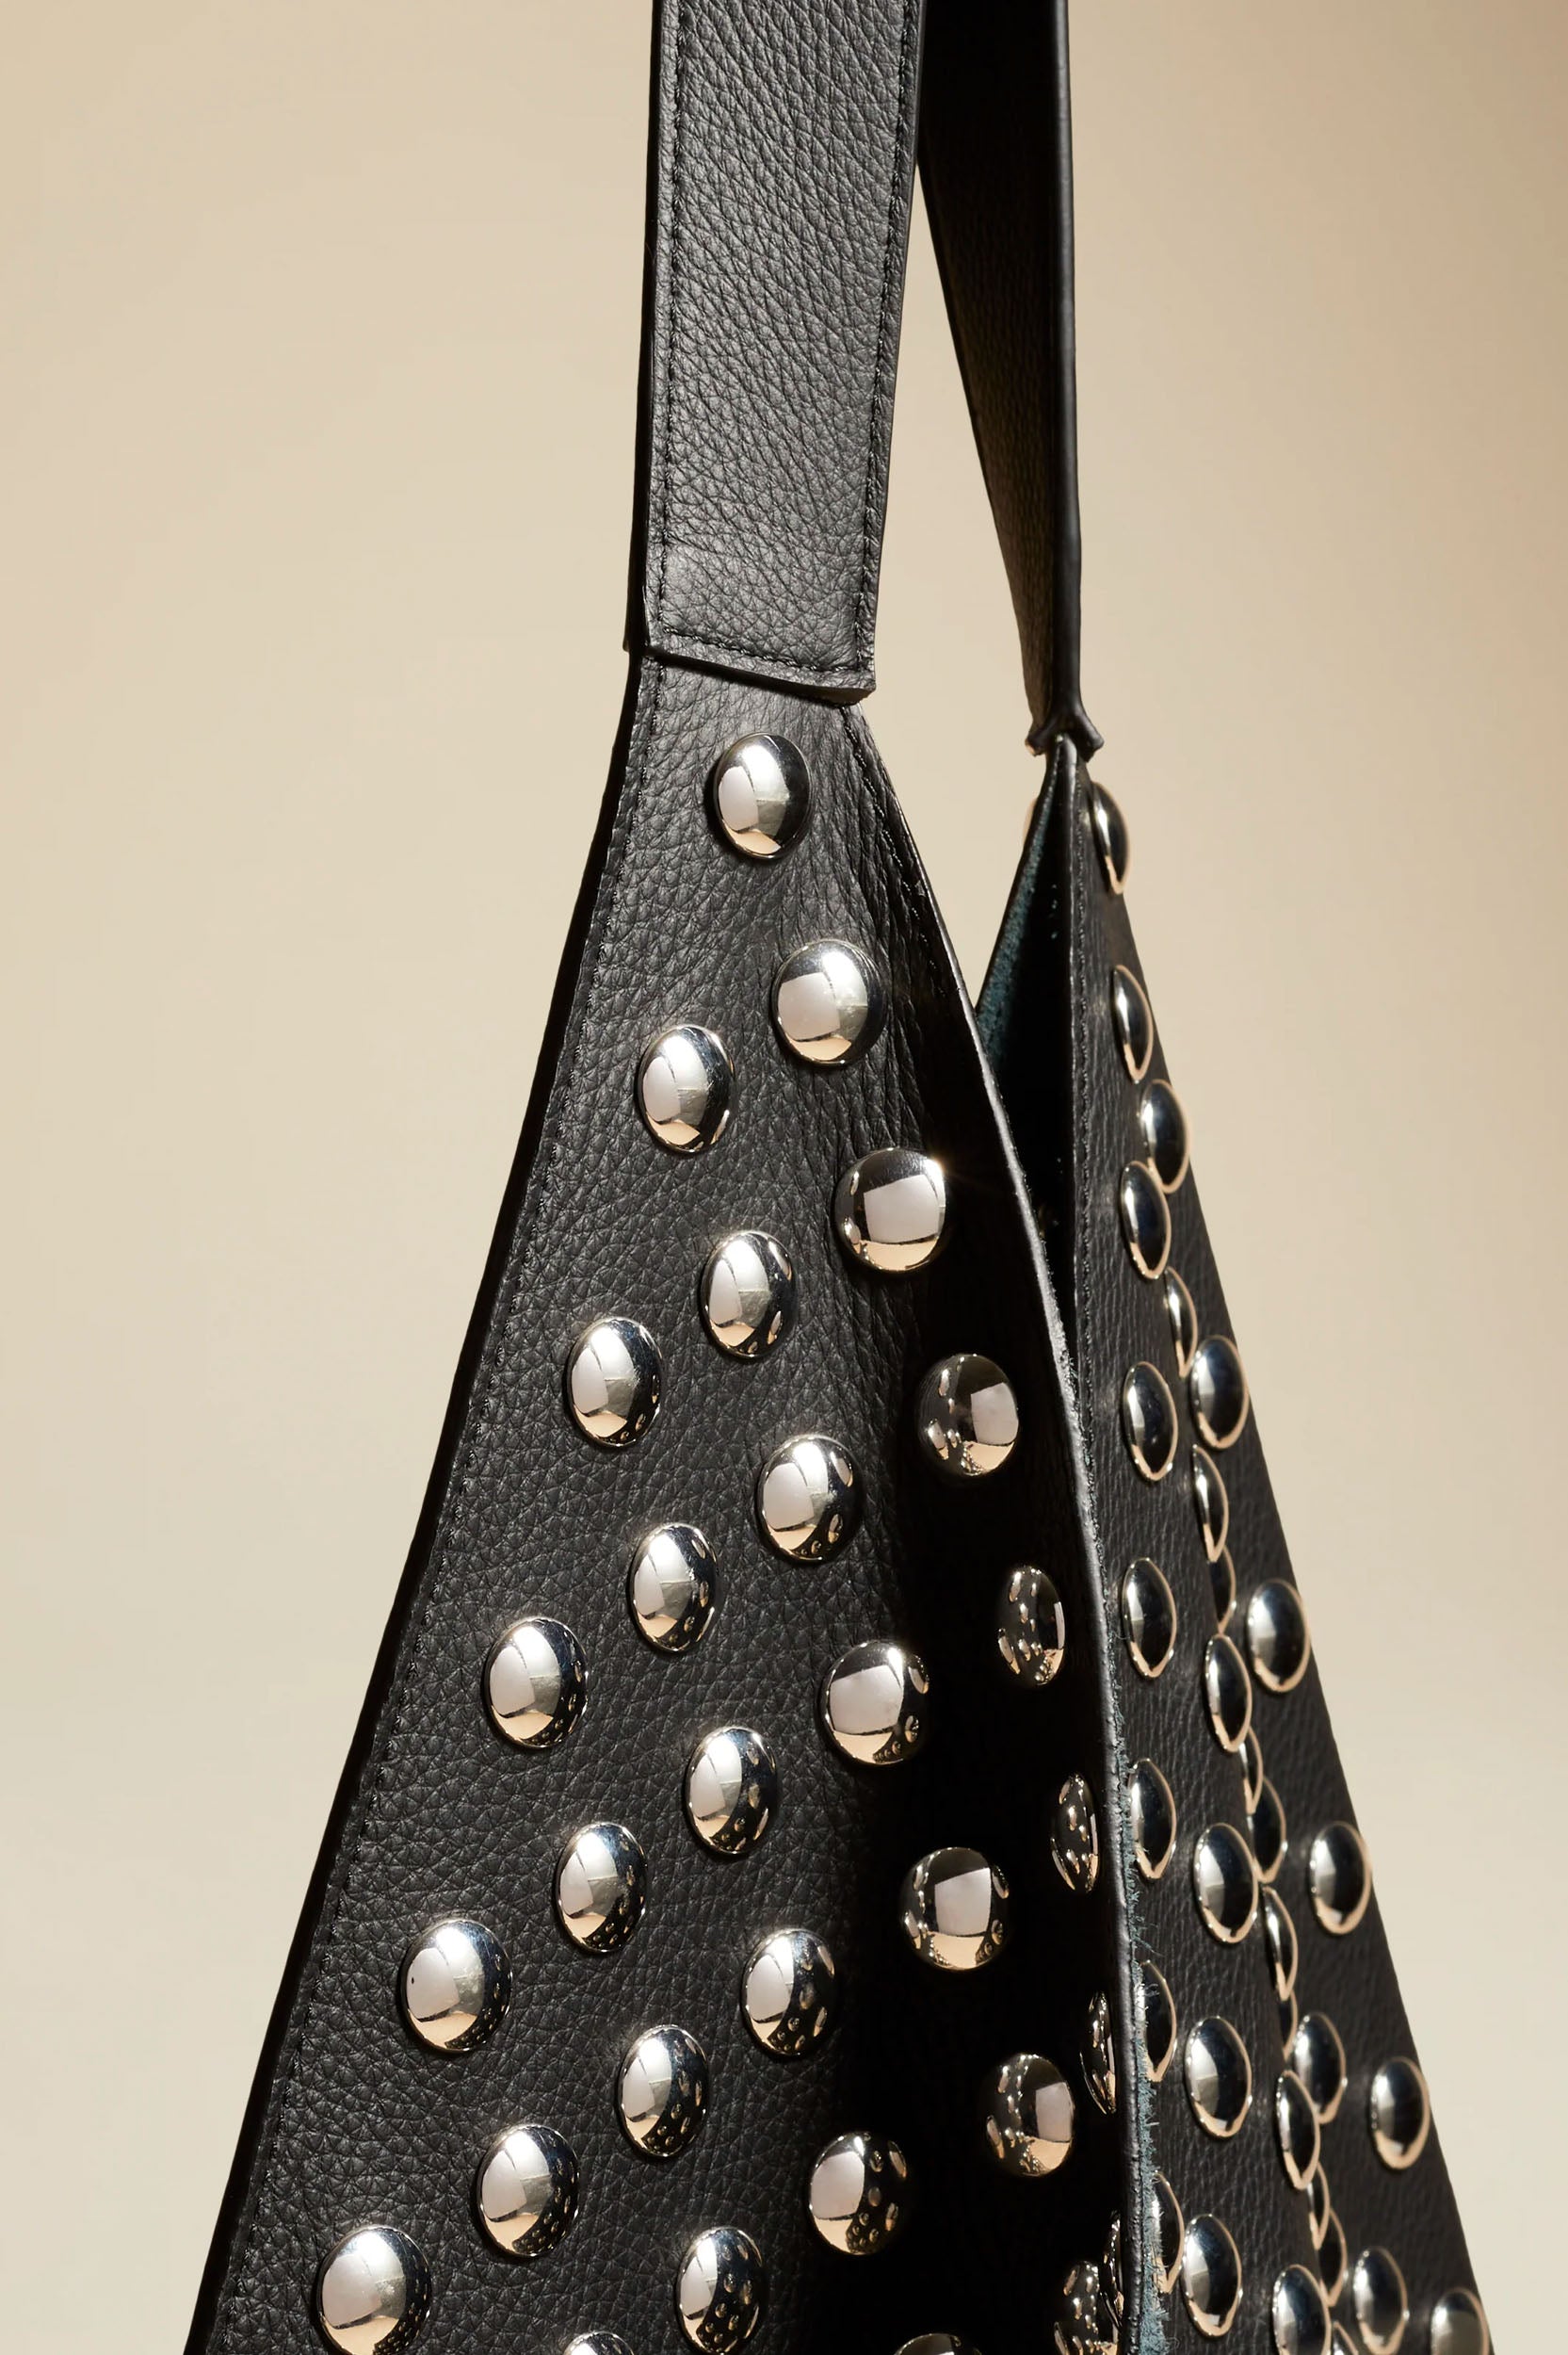 Sara Tote Bag with Silver Studs in Black